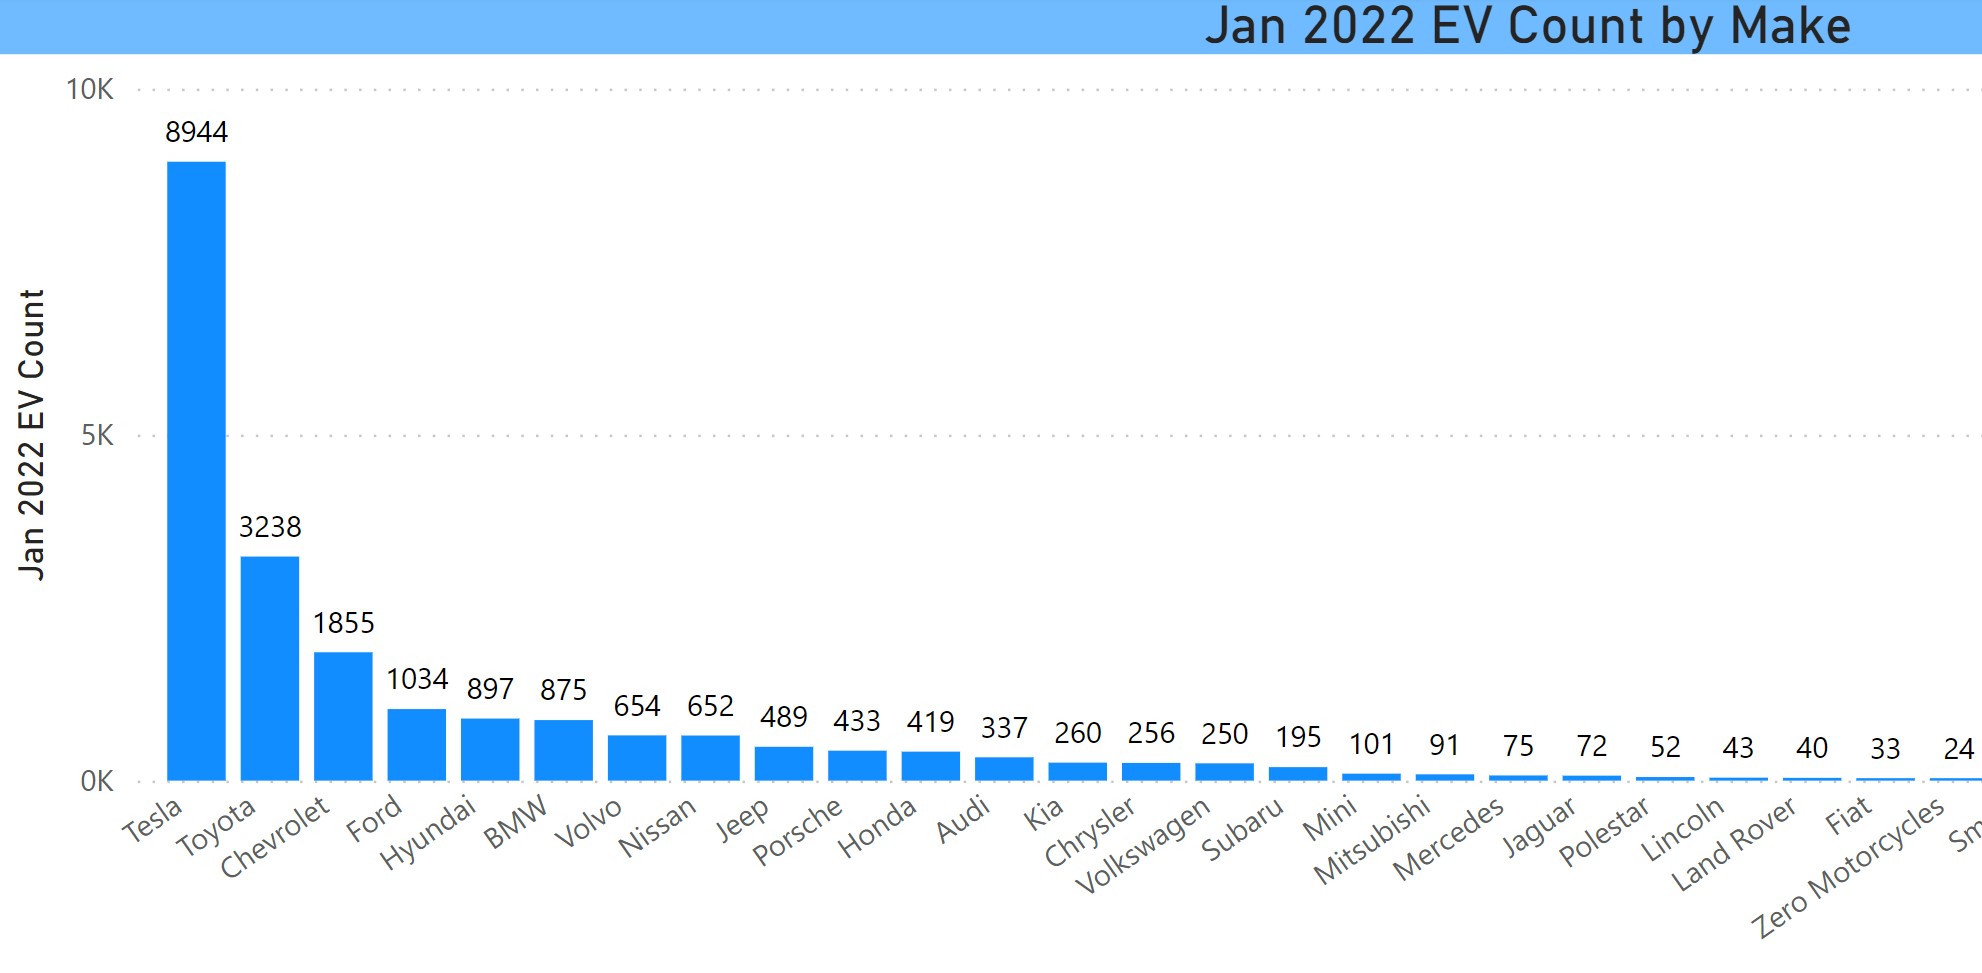 Jan 2022 EV Count by Make in CT